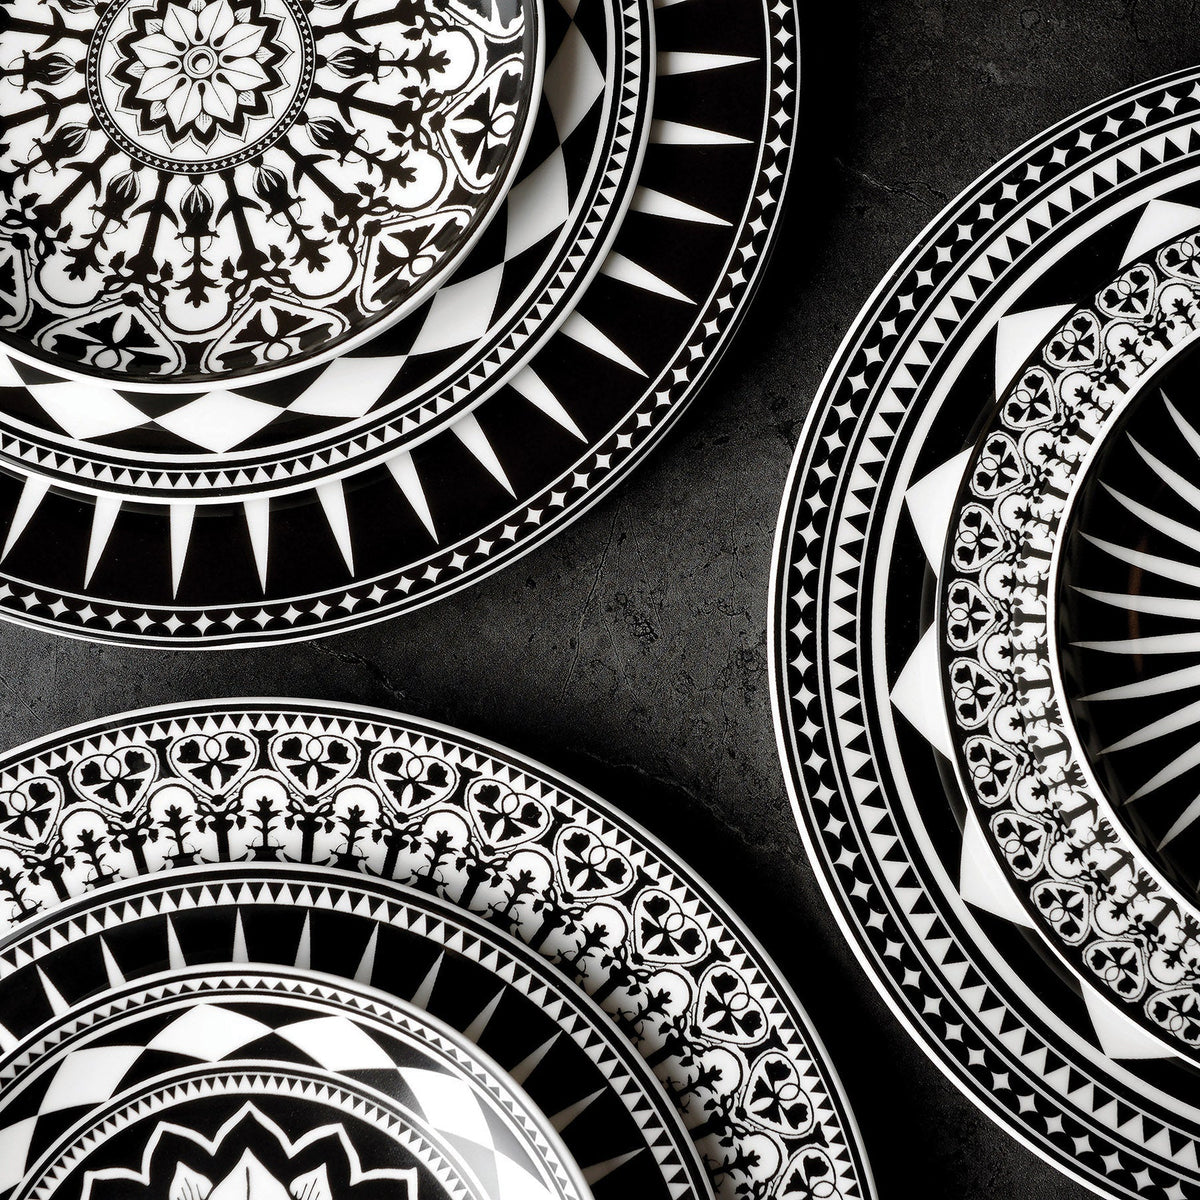 A collection of Casablanca Rimmed Dinner Plates by Caskata Artisanal Home featuring black and white ceramic plates with intricate geometric and floral patterns, all meticulously hand-decorated, arranged on a dark surface.